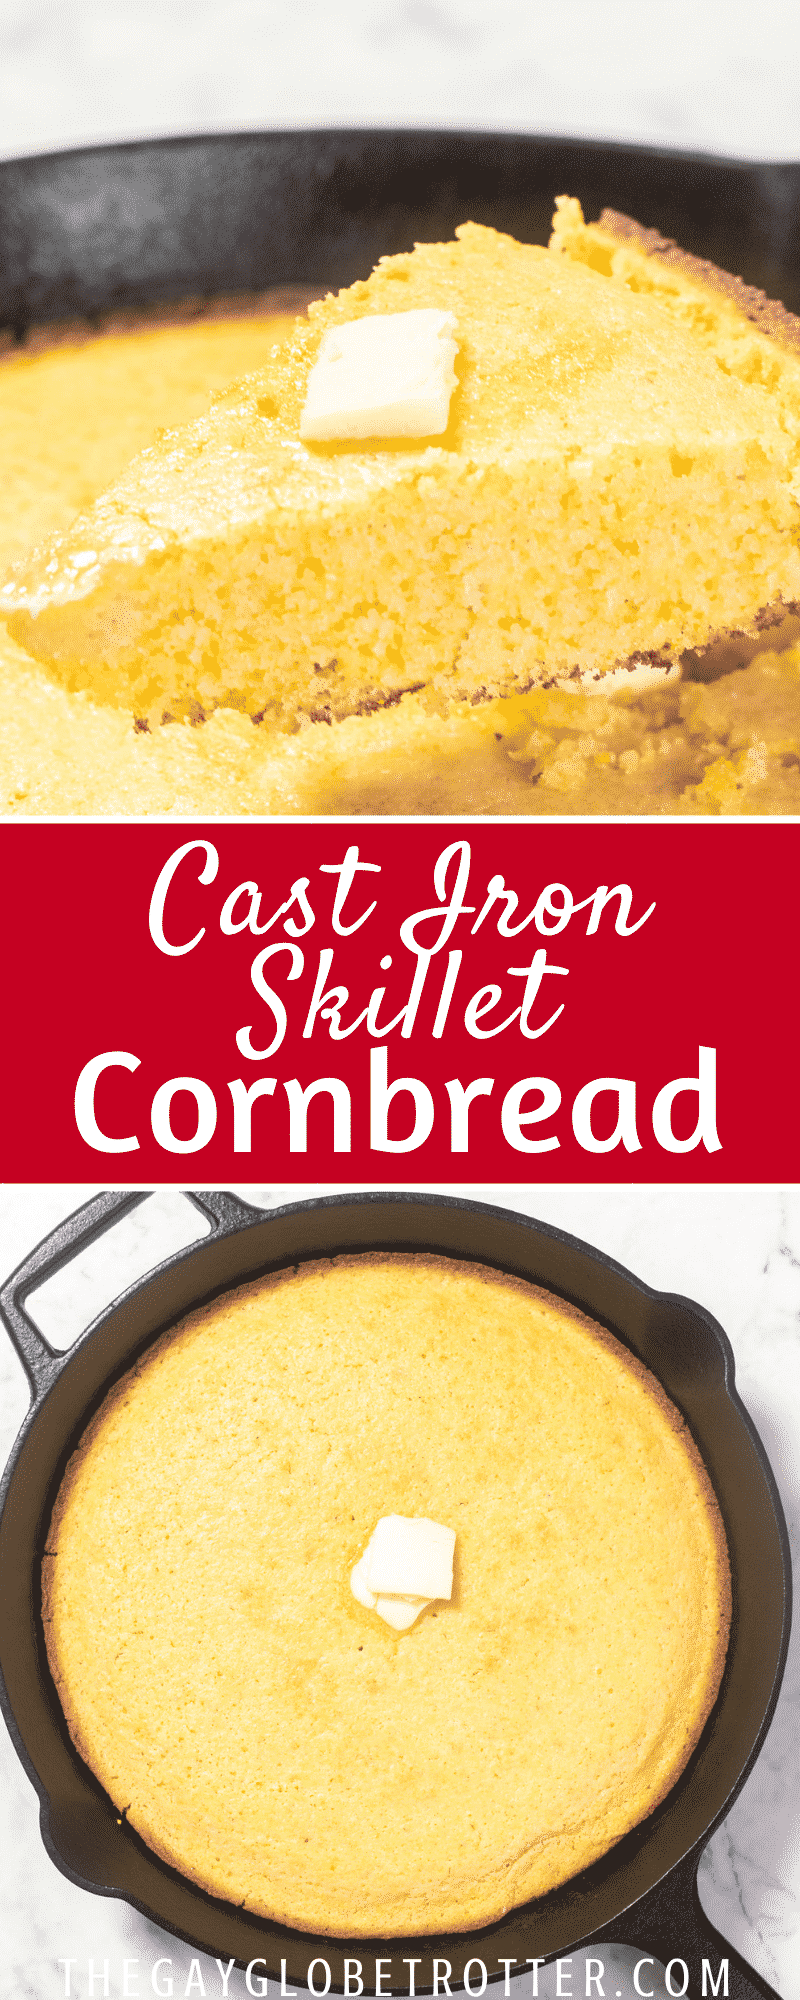 Skillet Cornbread {In 25 Minutes!} - The Gay Globetrotter